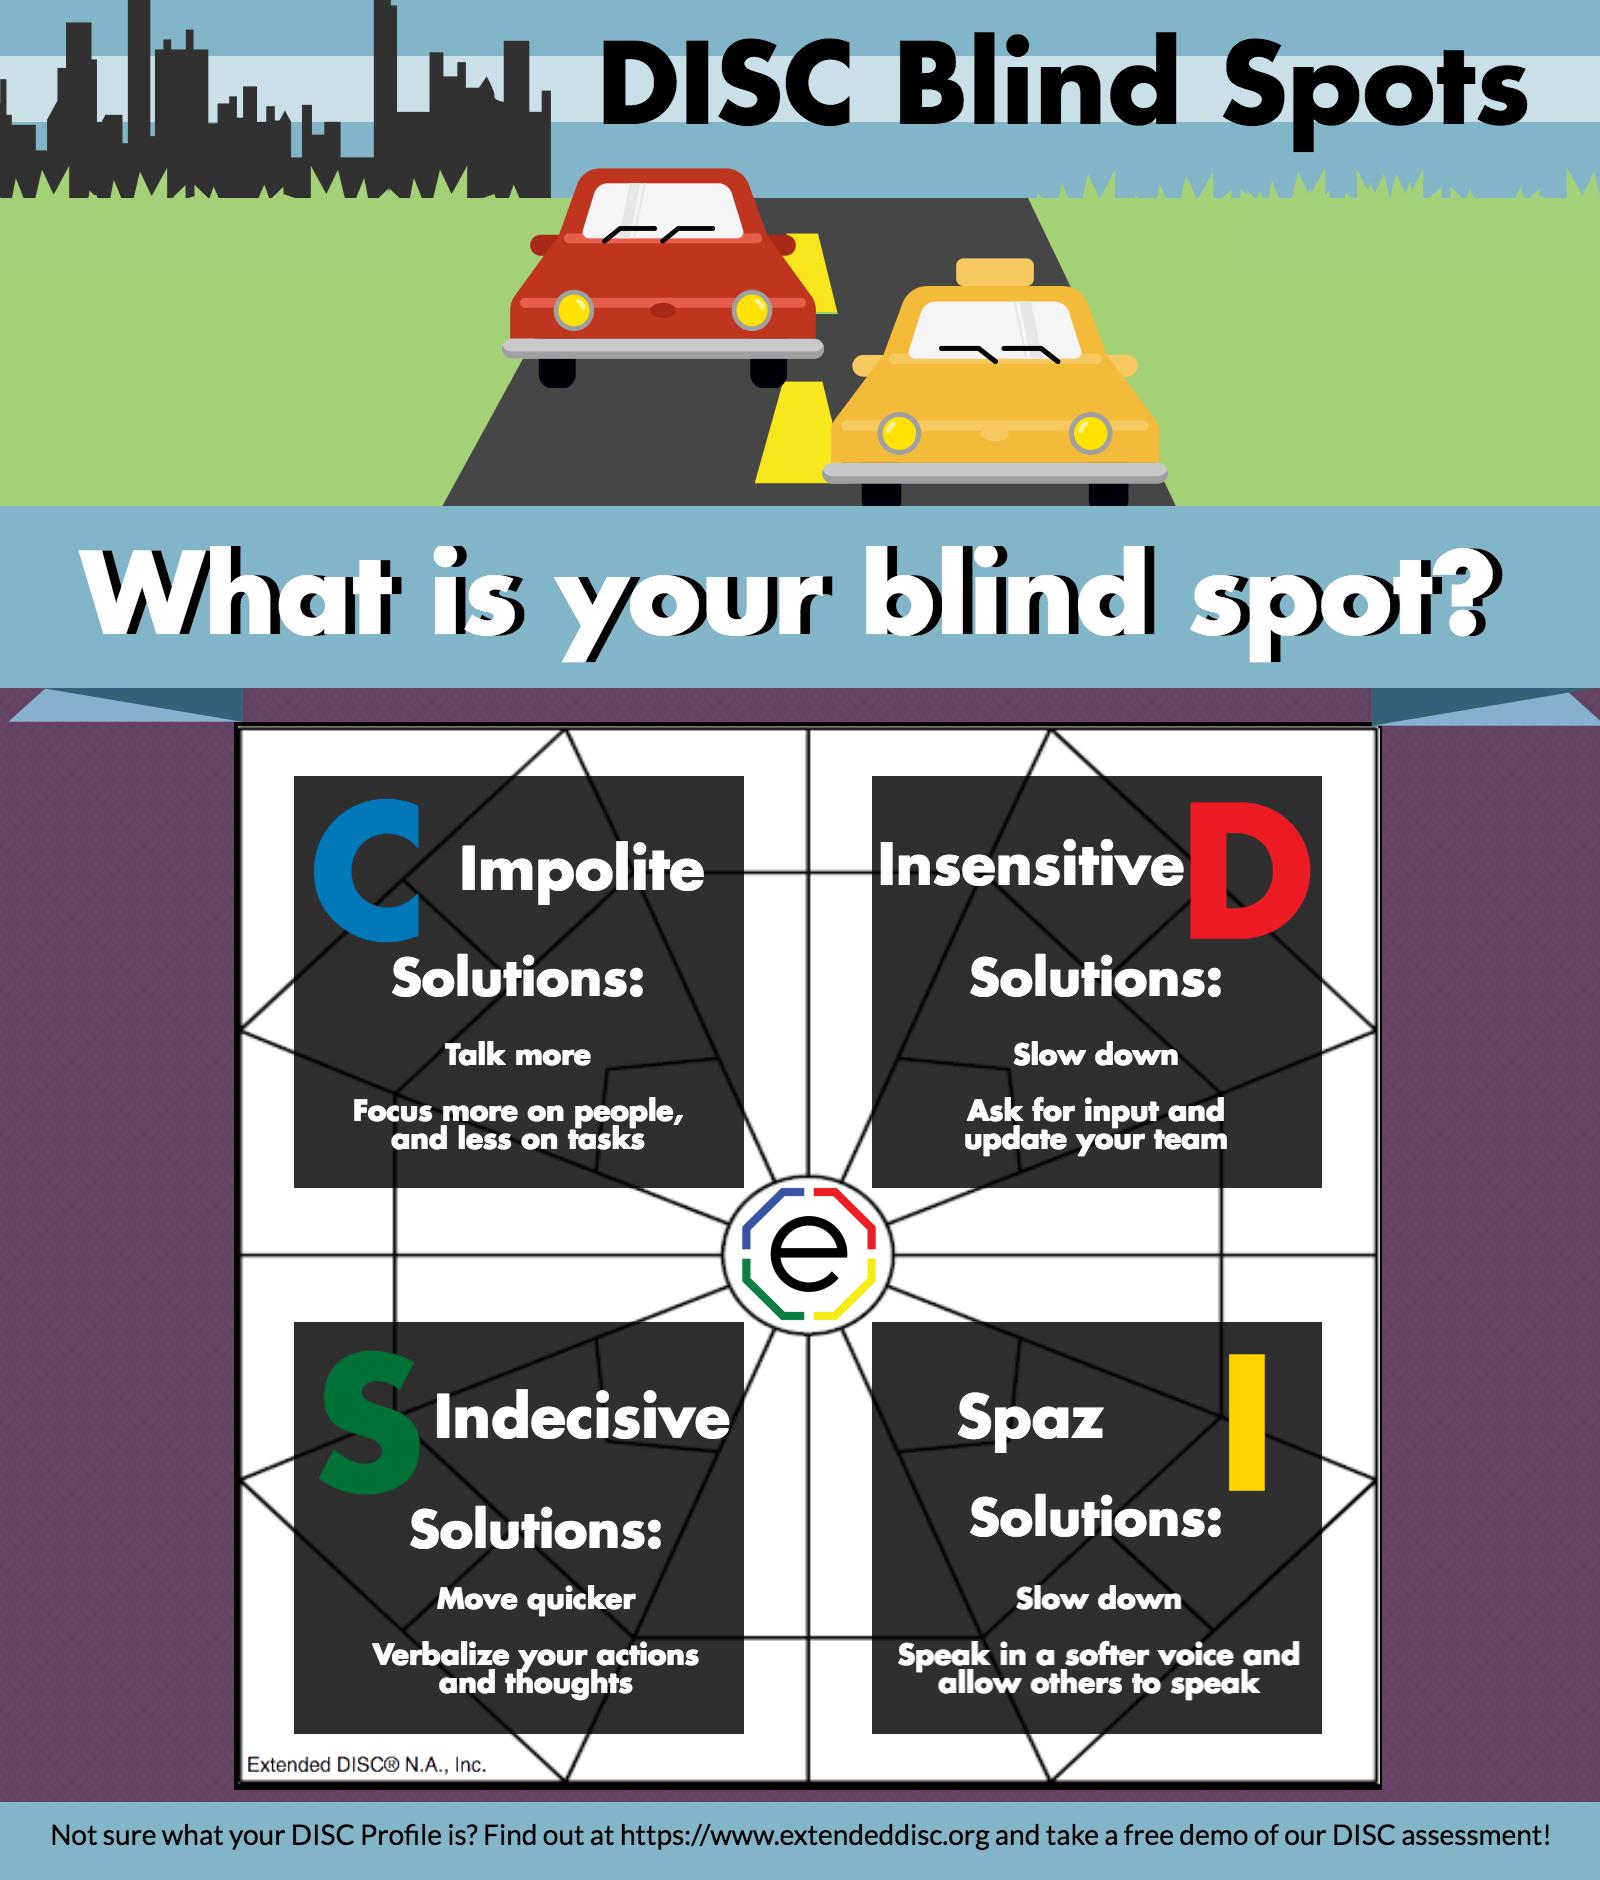 DISC Blind Spots: What Do You Mean I’m Insensitive?